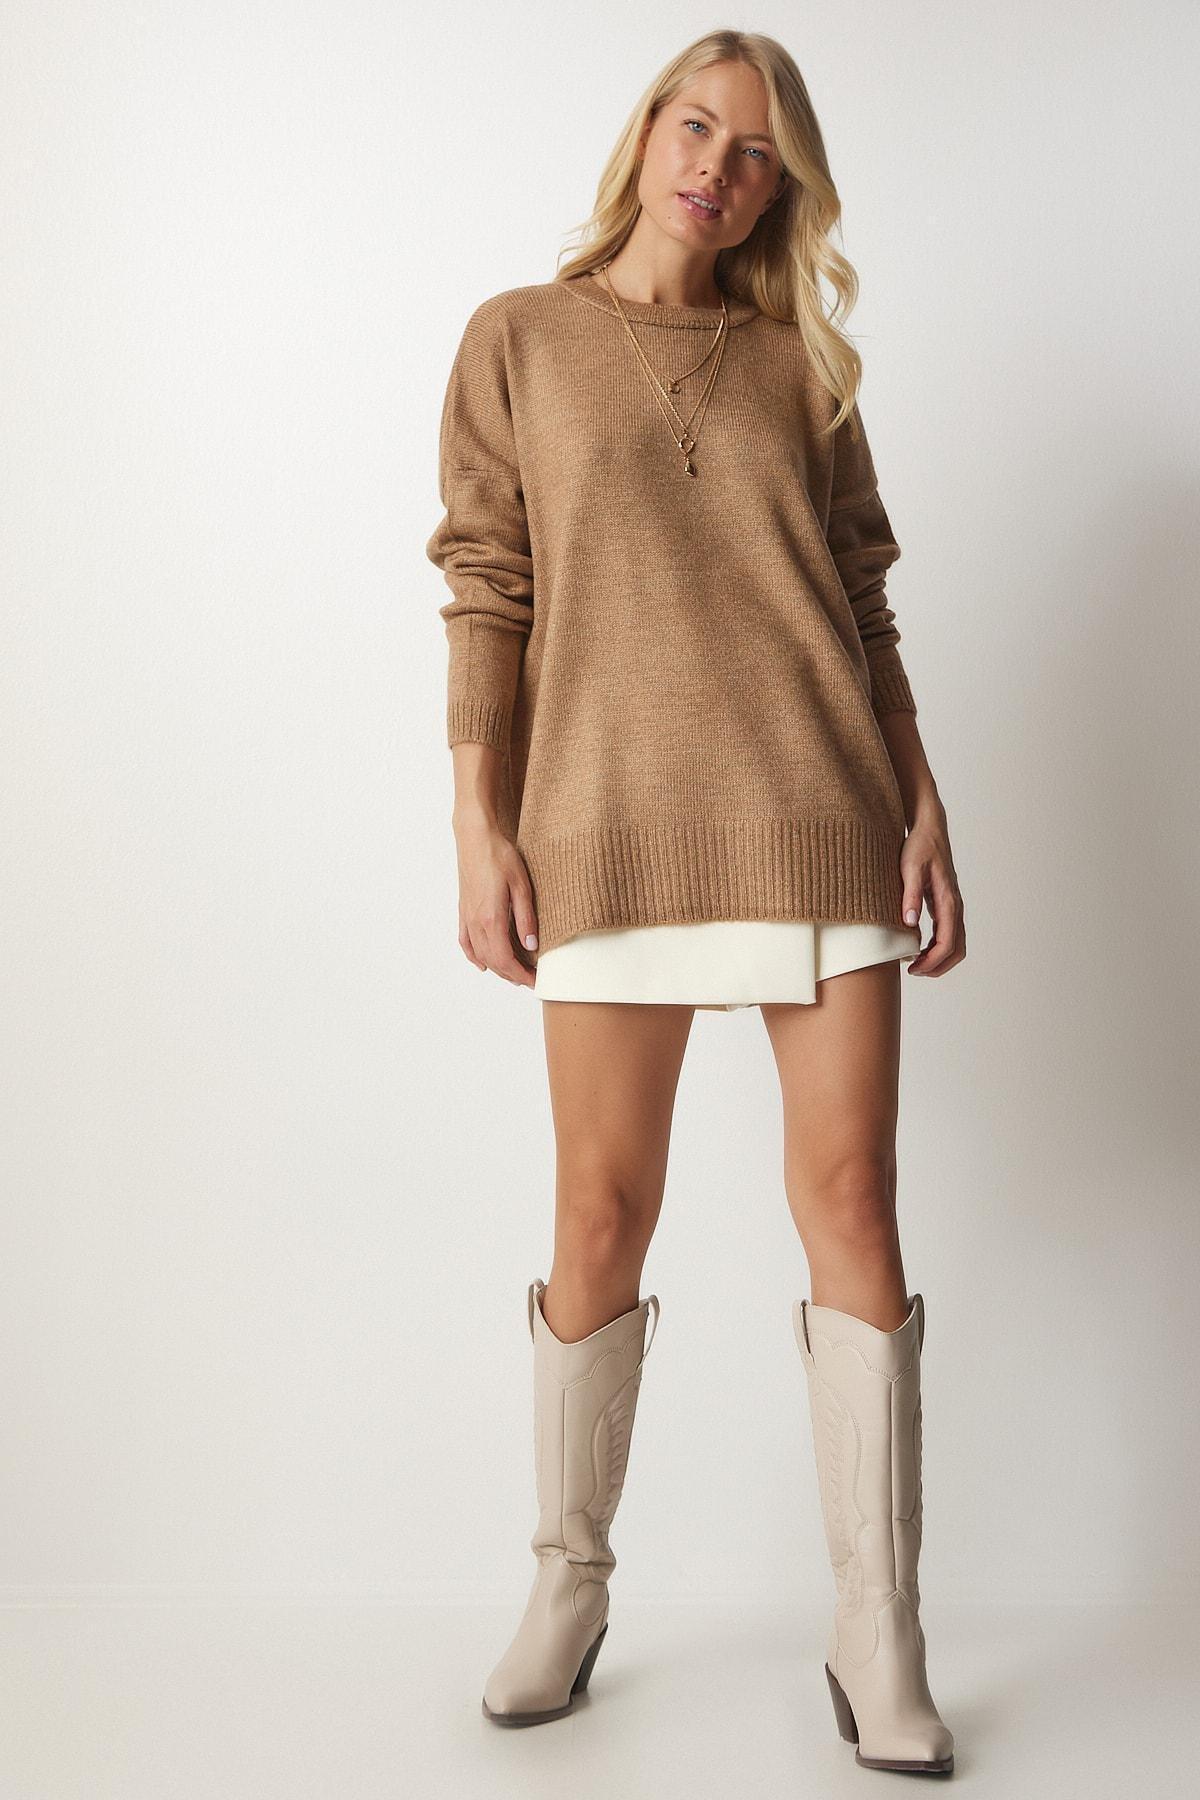 Happiness Istanbul - Brown Crew Neck Oversized Knitwear Sweater